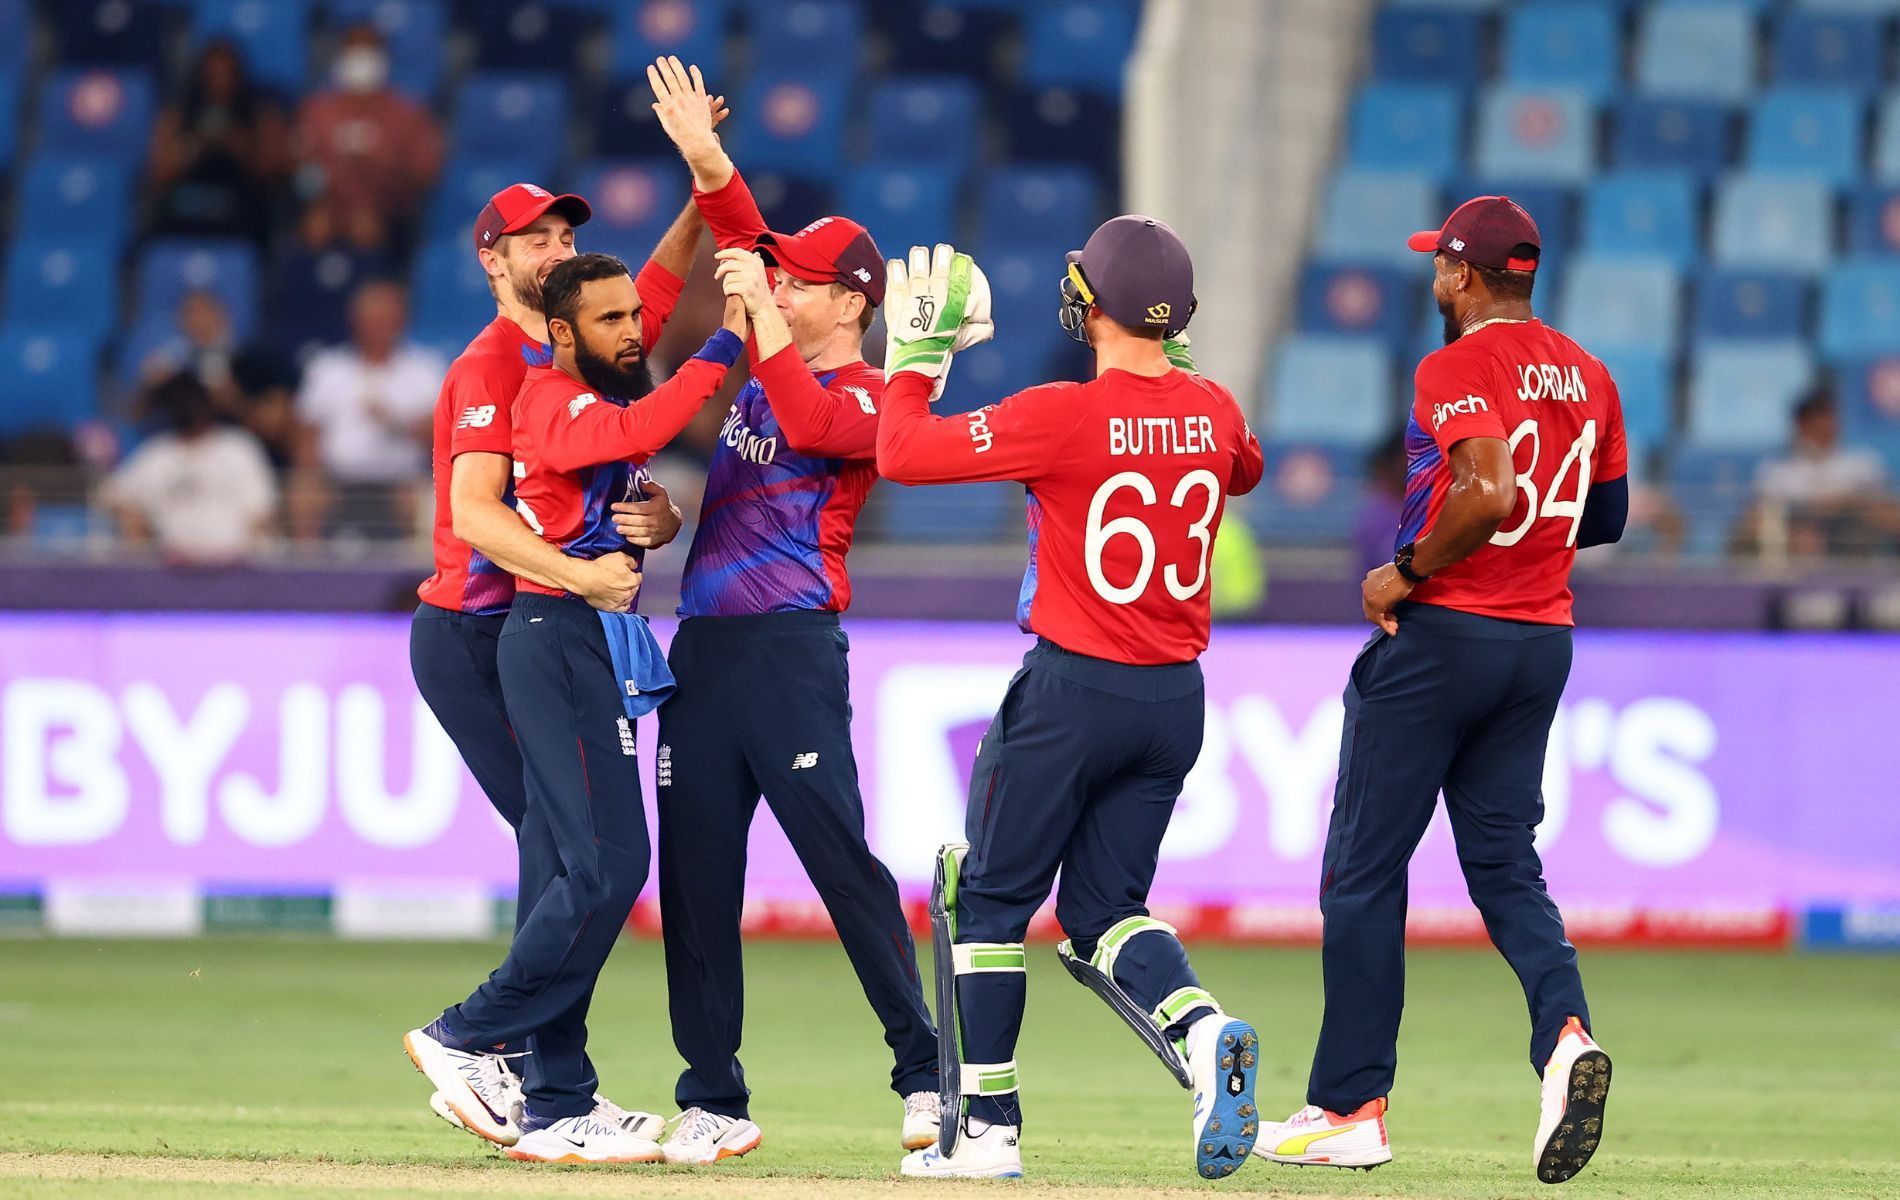 Adil Rashid starred for England, taking four wickets for just two runs.